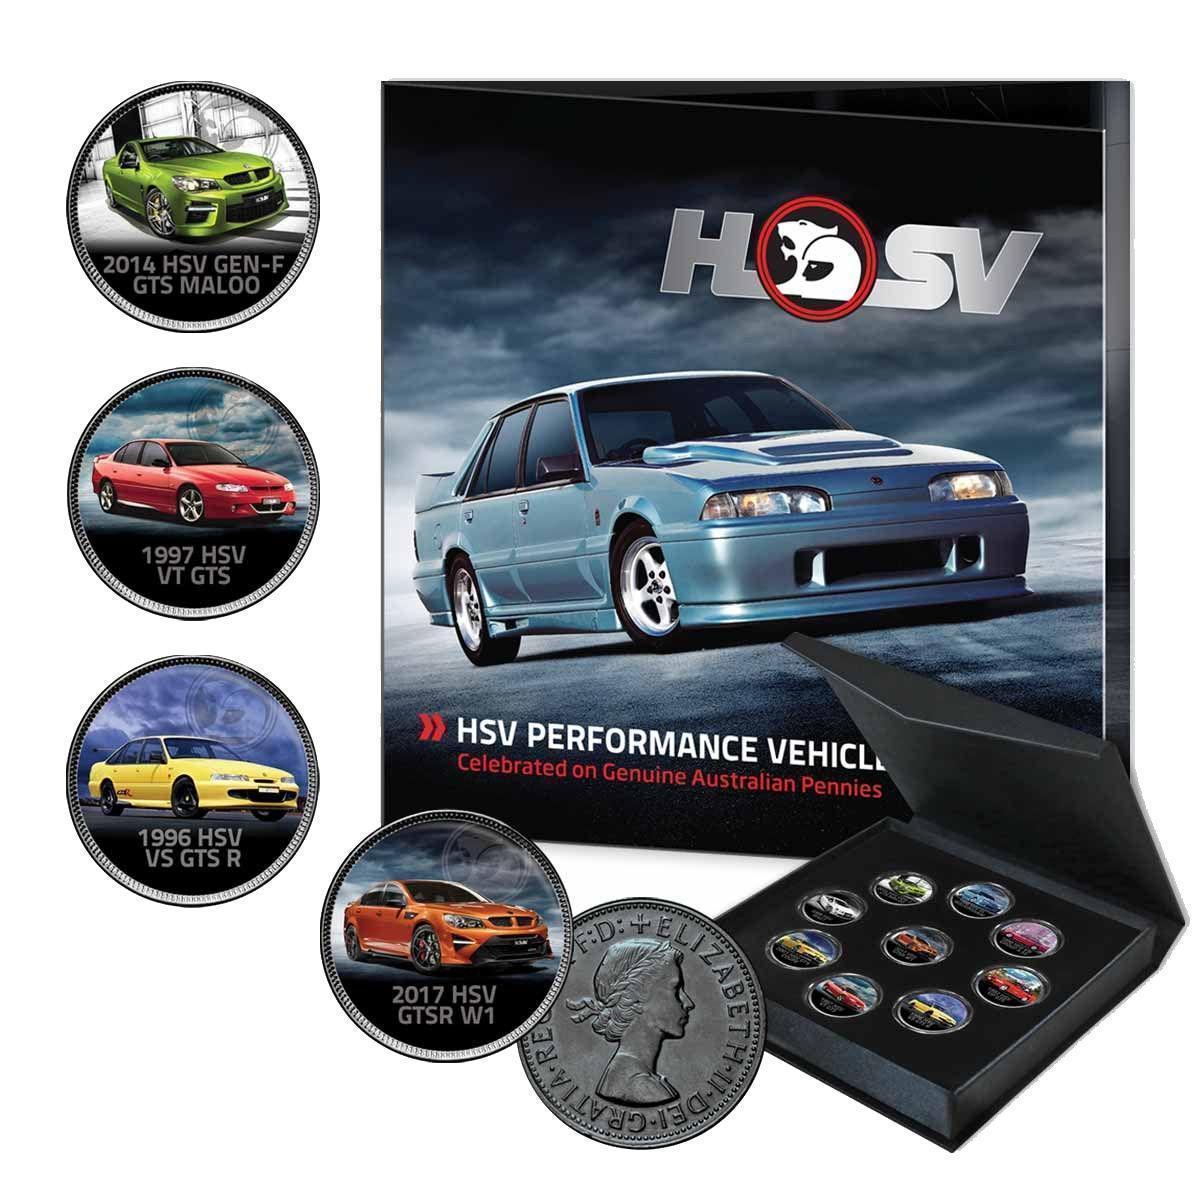 PRE ORDER - 2020 Holden HSV Cars Silver-Plated Enamel Penny Collection Comprises Full-Colour Australian Pennies - $50 Deposit (FULL PRICE - $149.99)